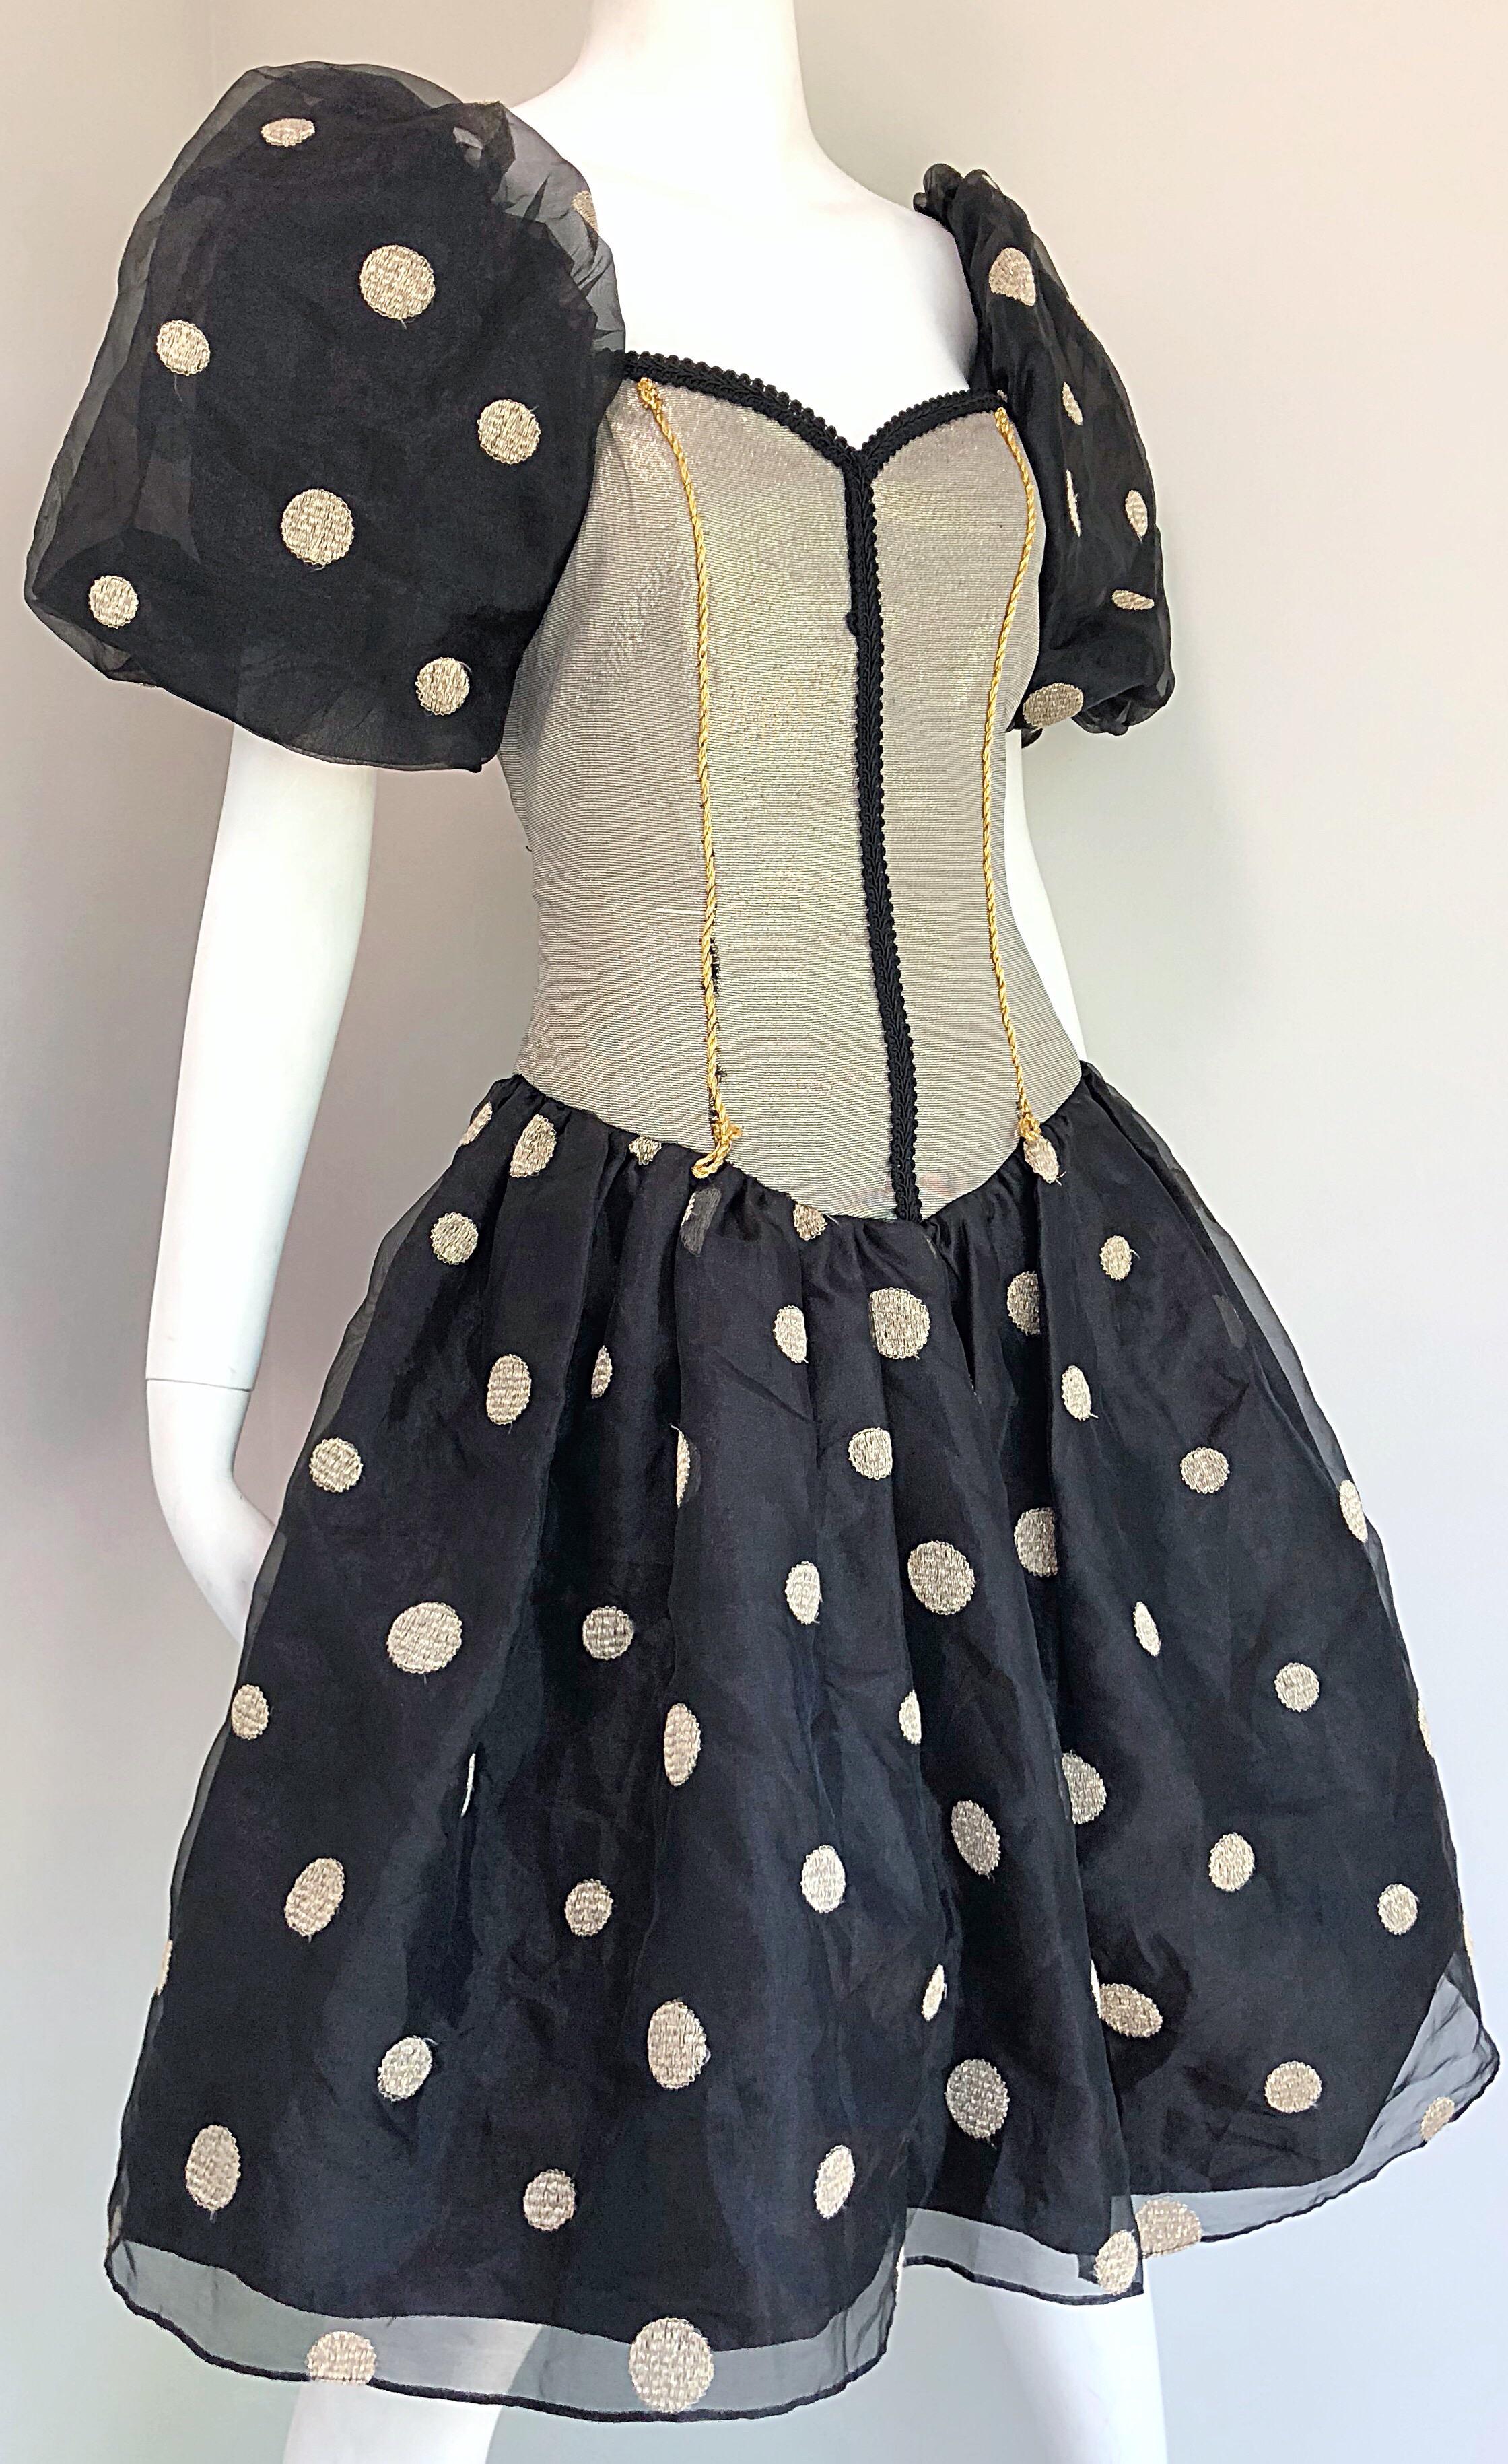 Fabulous 1980s Avant Garde Gold + Black Polka Dot Puff Sleeve Vintage 80s Dress In Excellent Condition For Sale In San Diego, CA